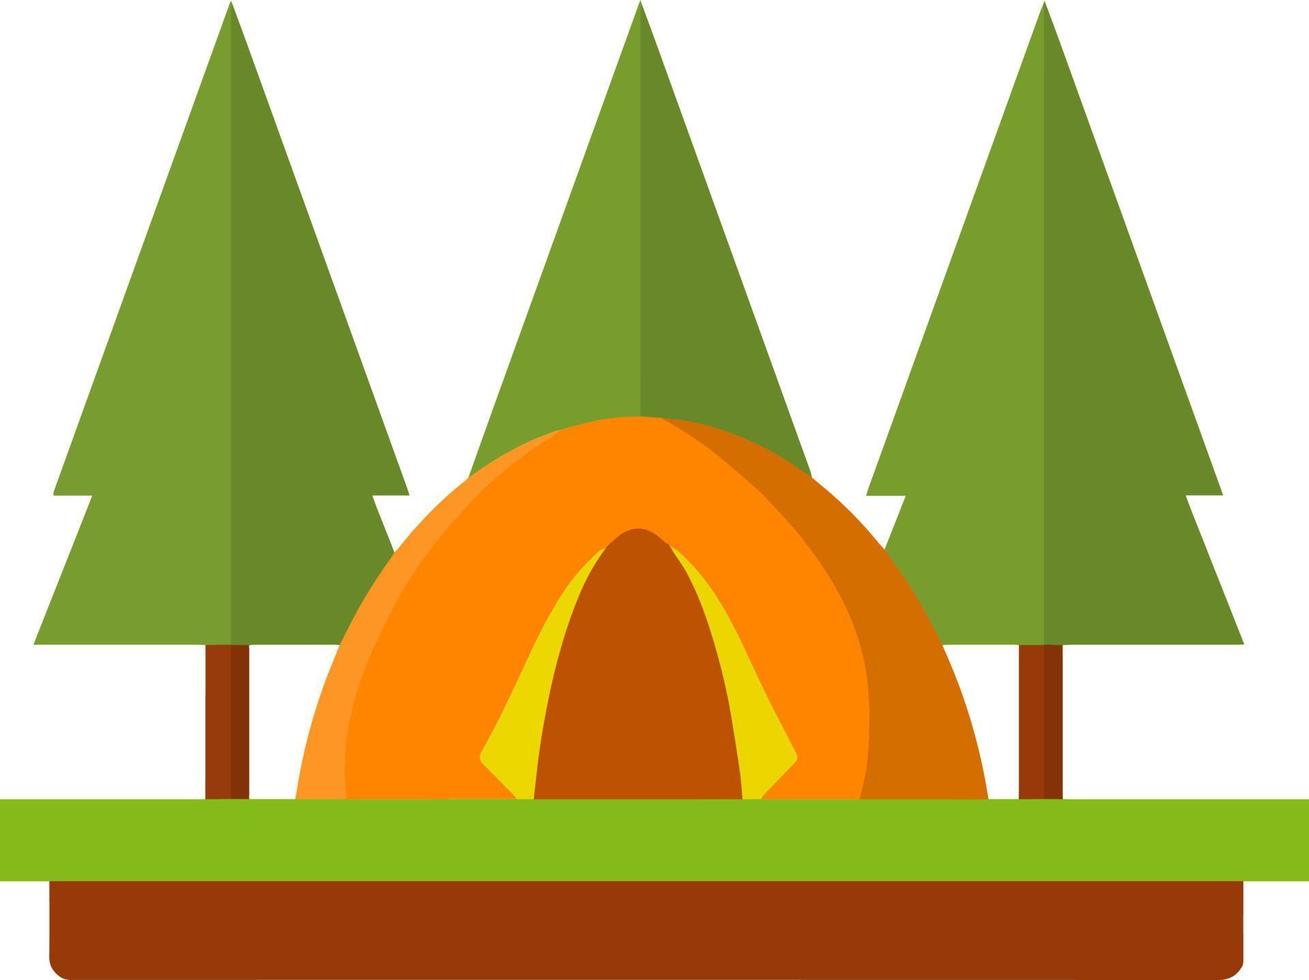 Orange tent in woods. Outdoor activity. Camp and hike. campfire and rest in forest. Trip to nature. Cartoon flat illustration vector